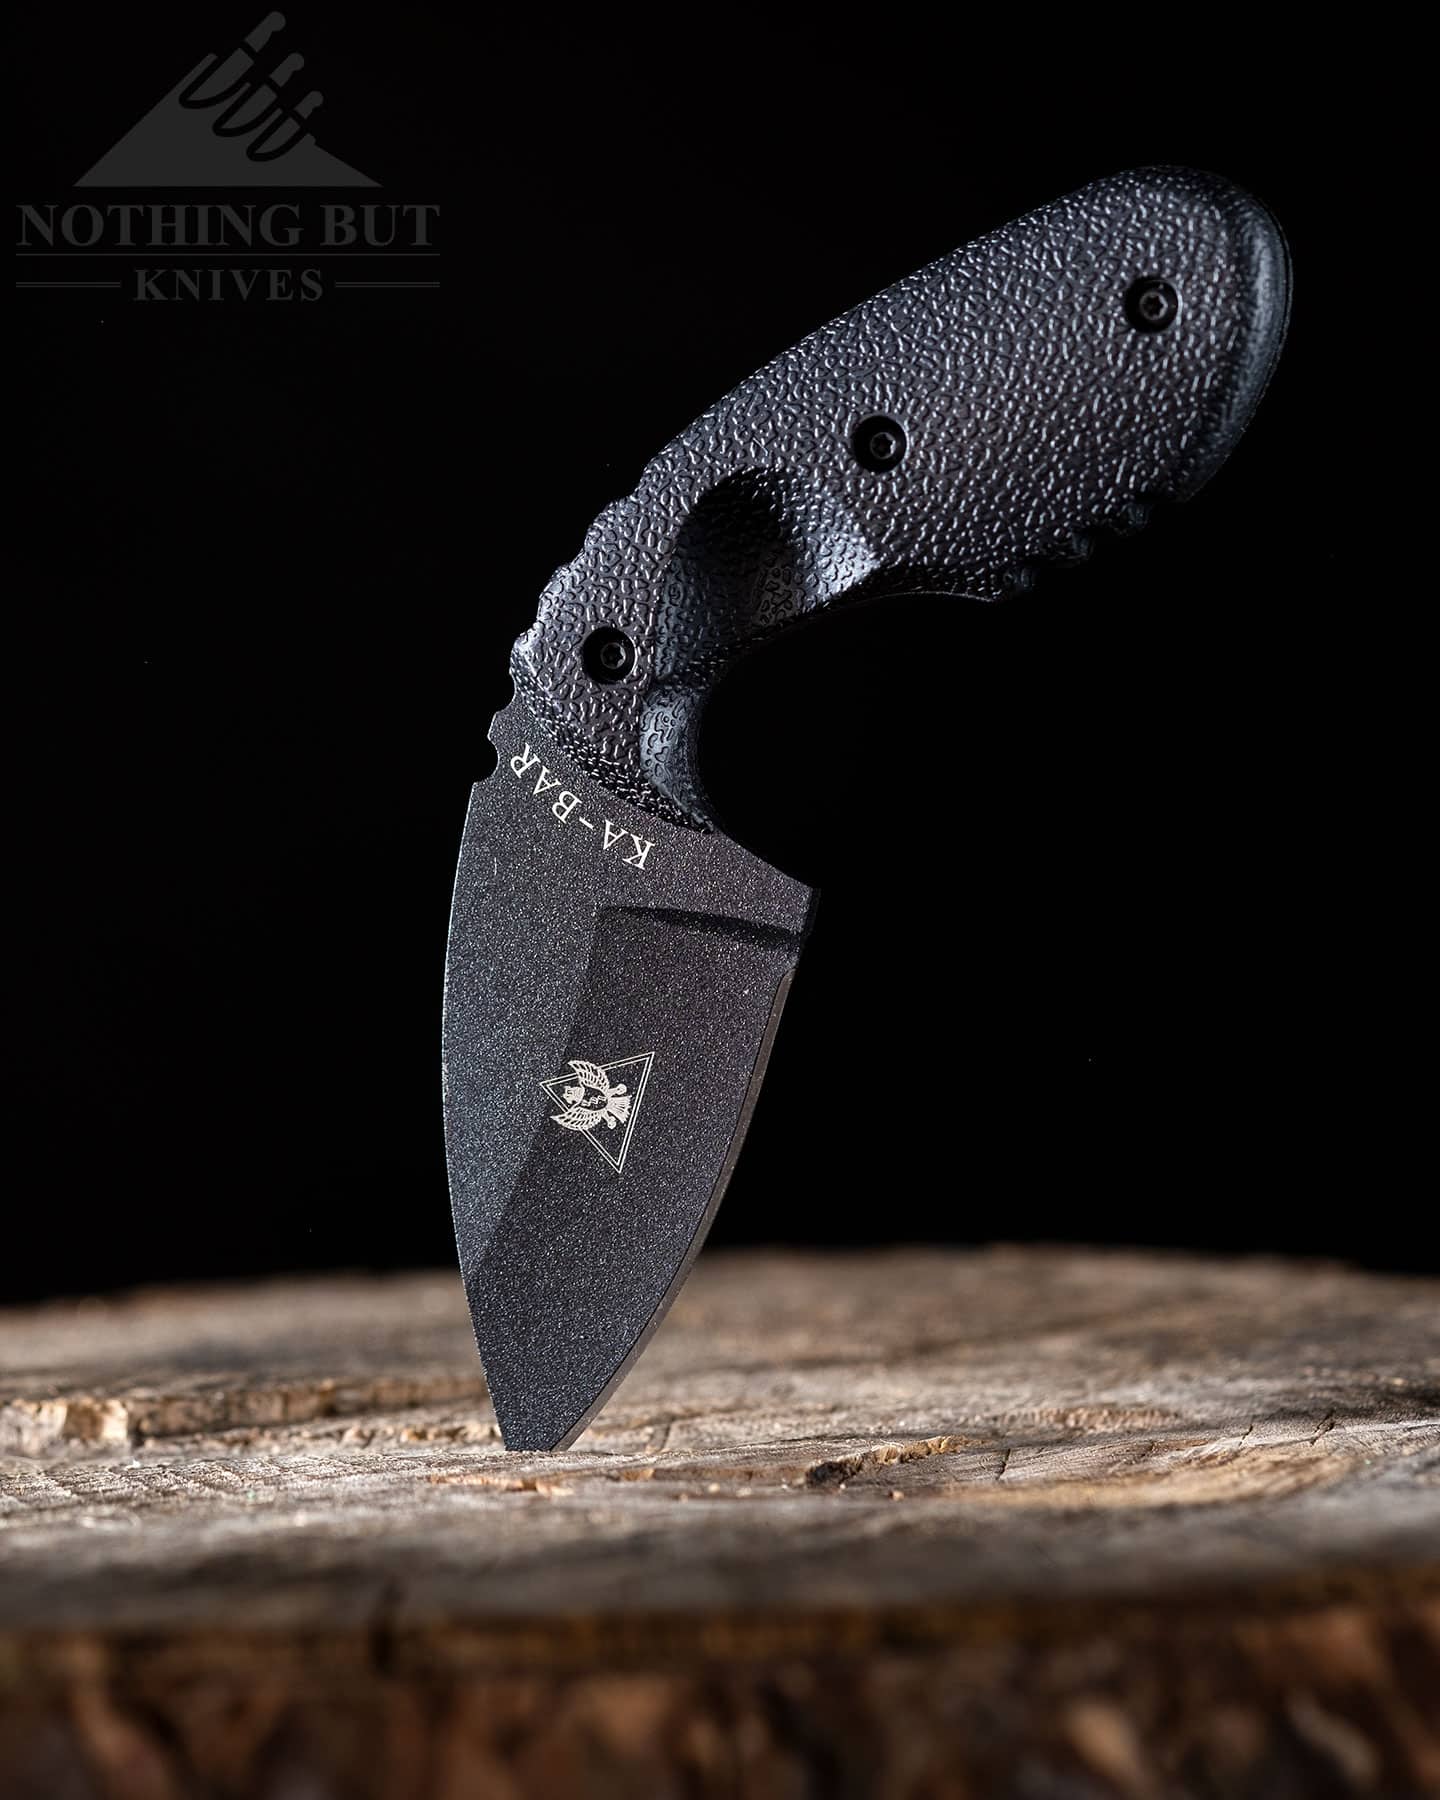 This Ka-Bar TDi designed specifically as a back-up blade that’s easy to pack and conceal.